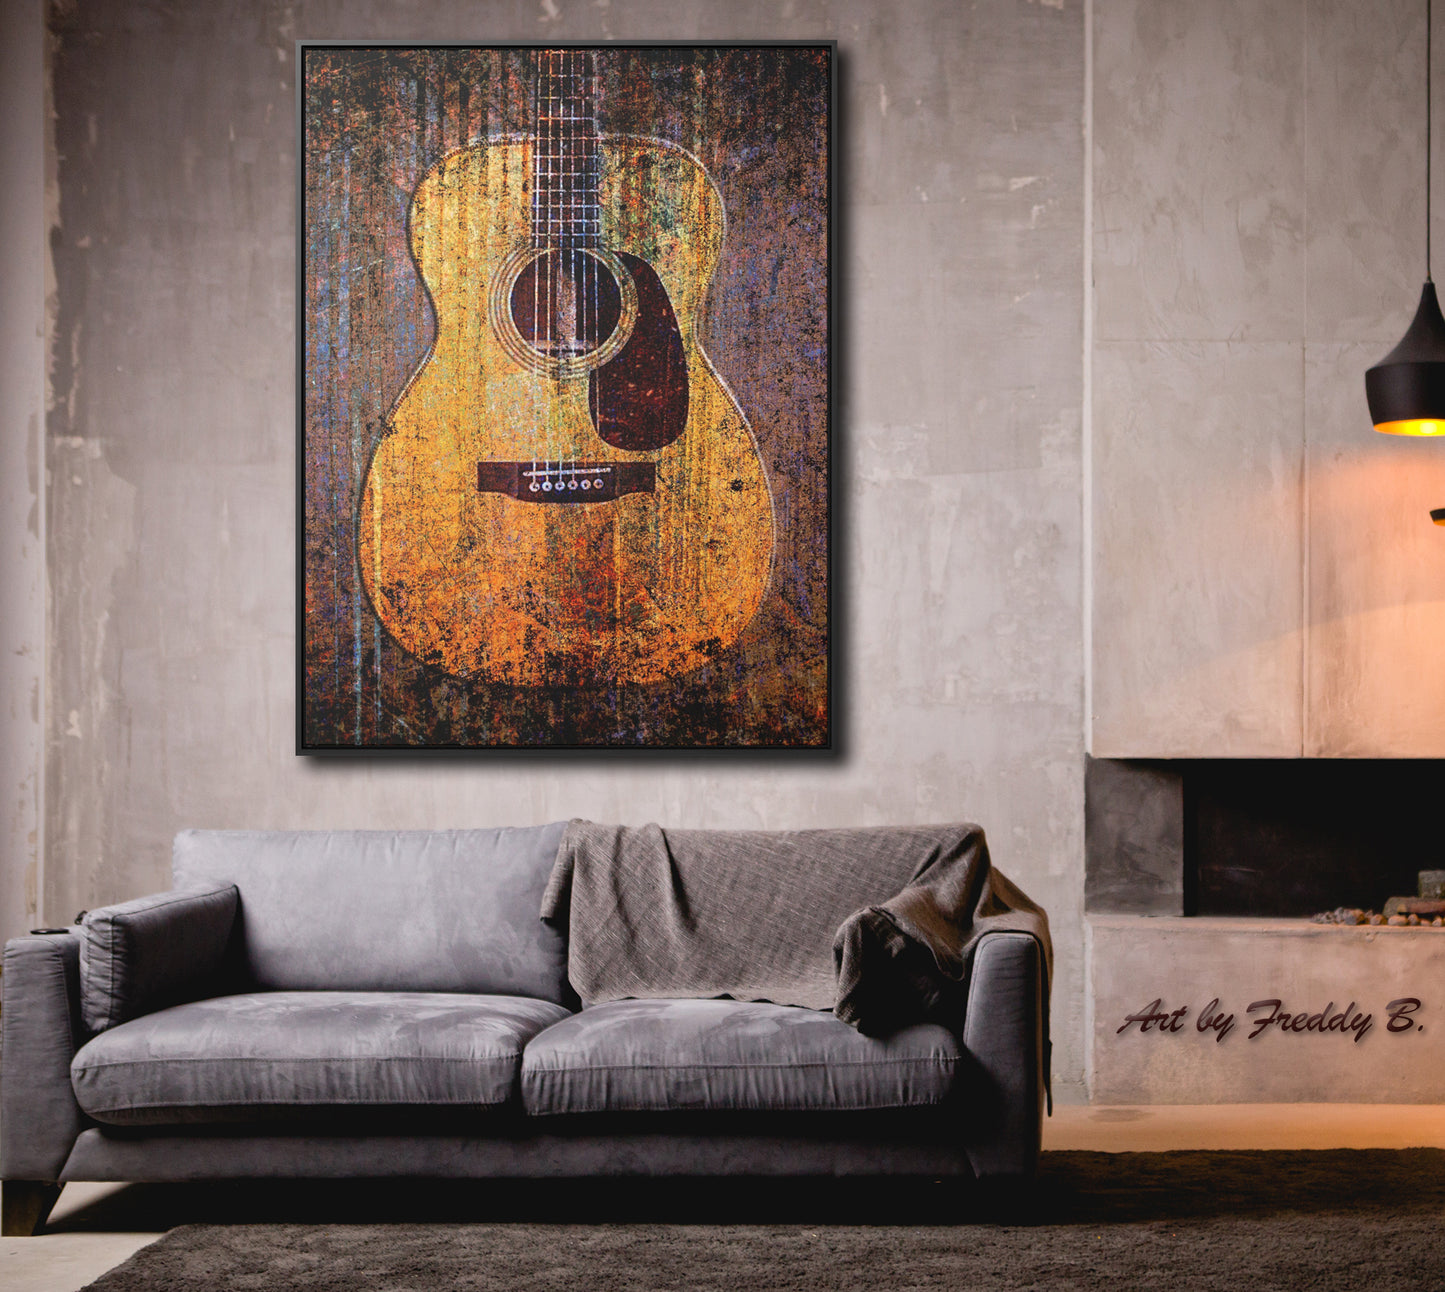  Acoustic Guitar Printed on Stretched Rectangular Canvas in a Black Floating Frame hung on wall